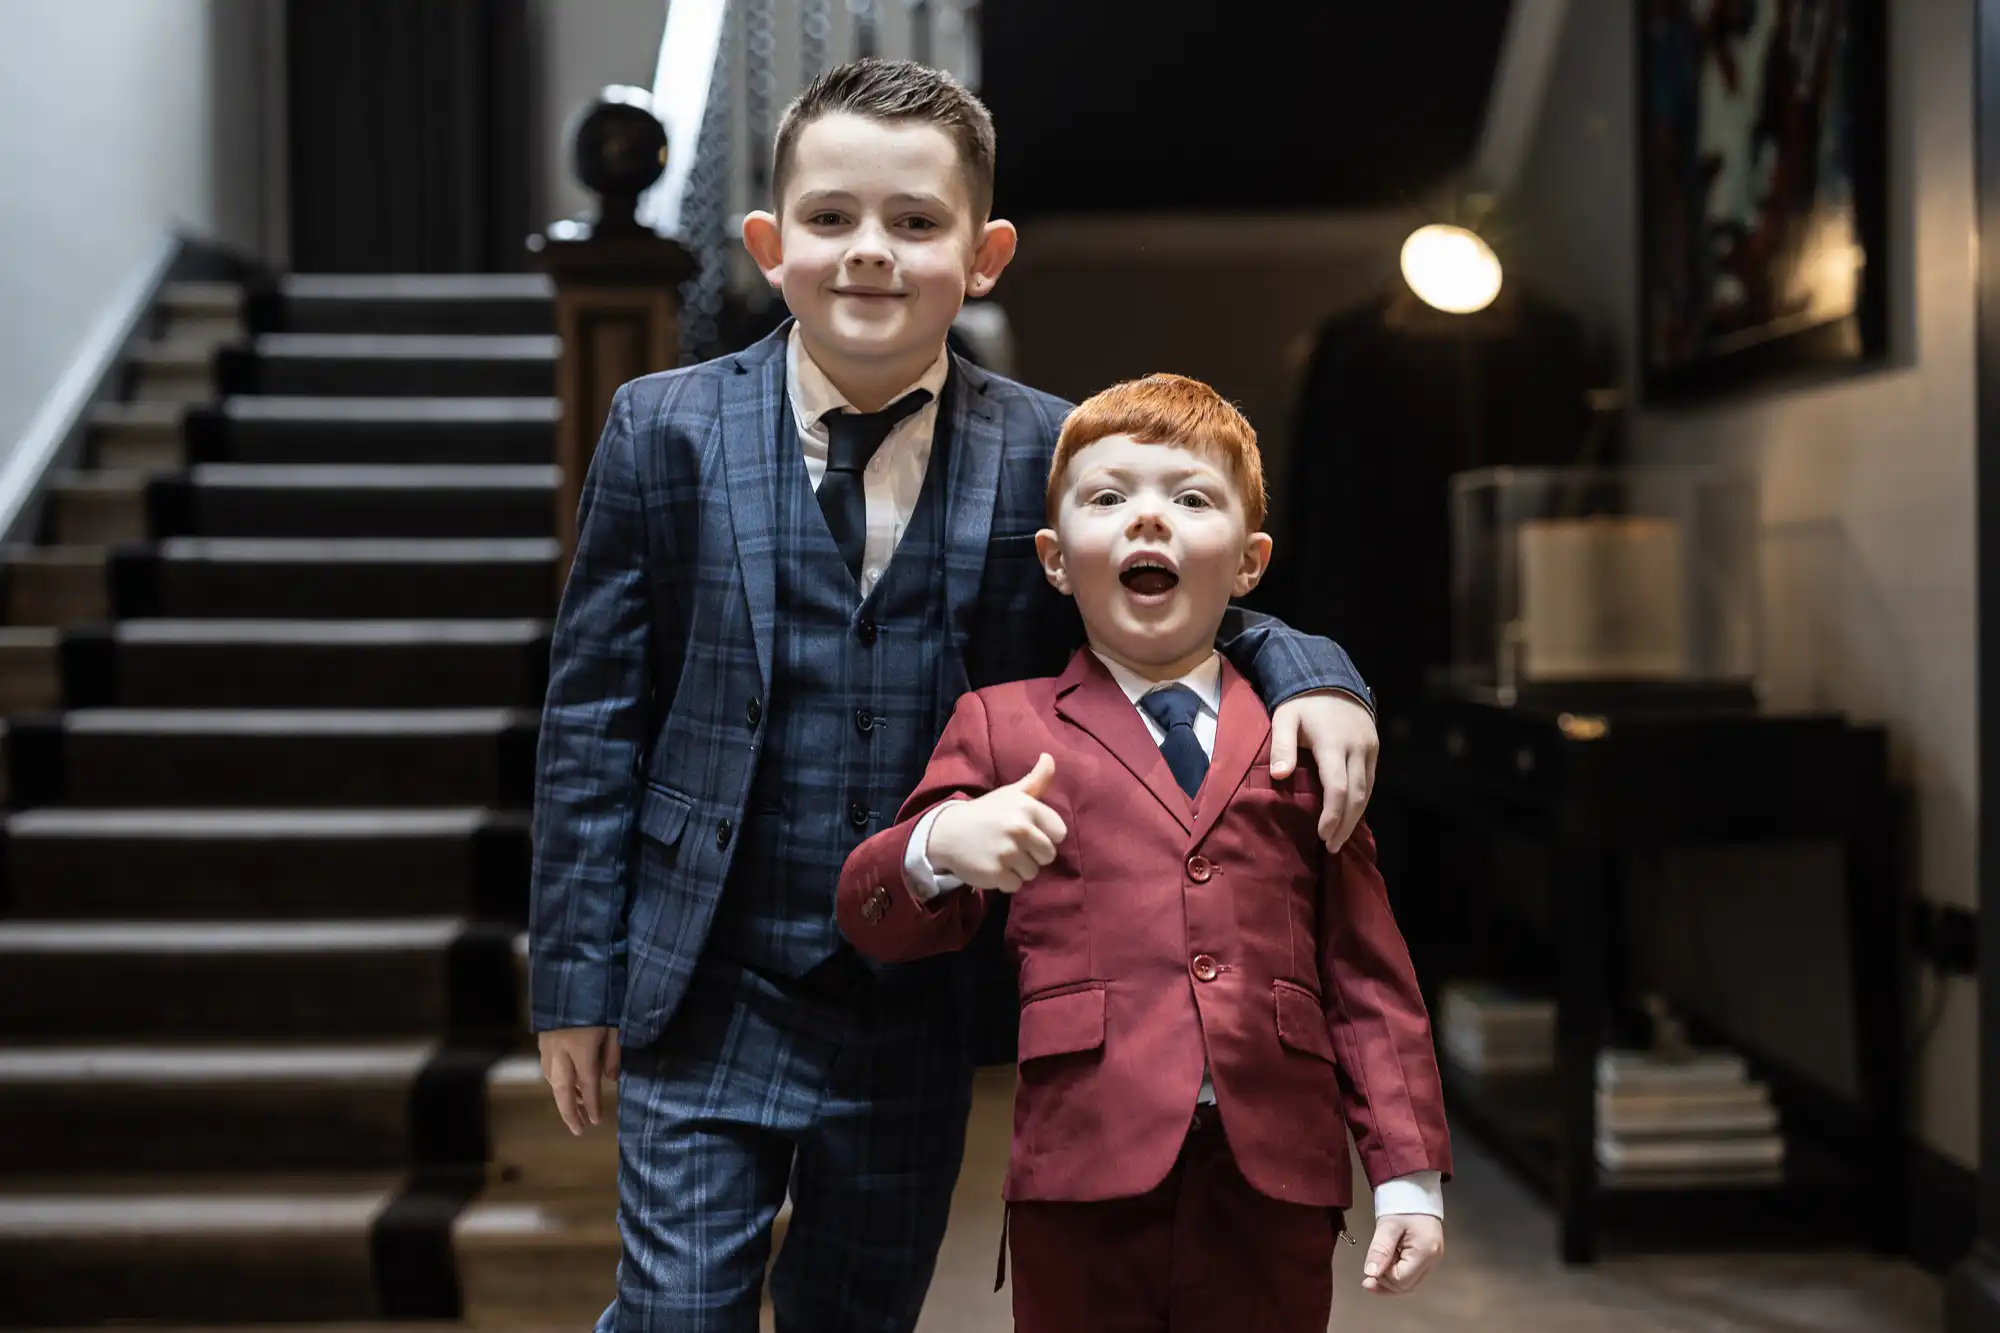 Two young boys dressed in suits stand inside a modern home, with one boy in a blue plaid suit and the other in a red suit giving a thumbs up gesture.